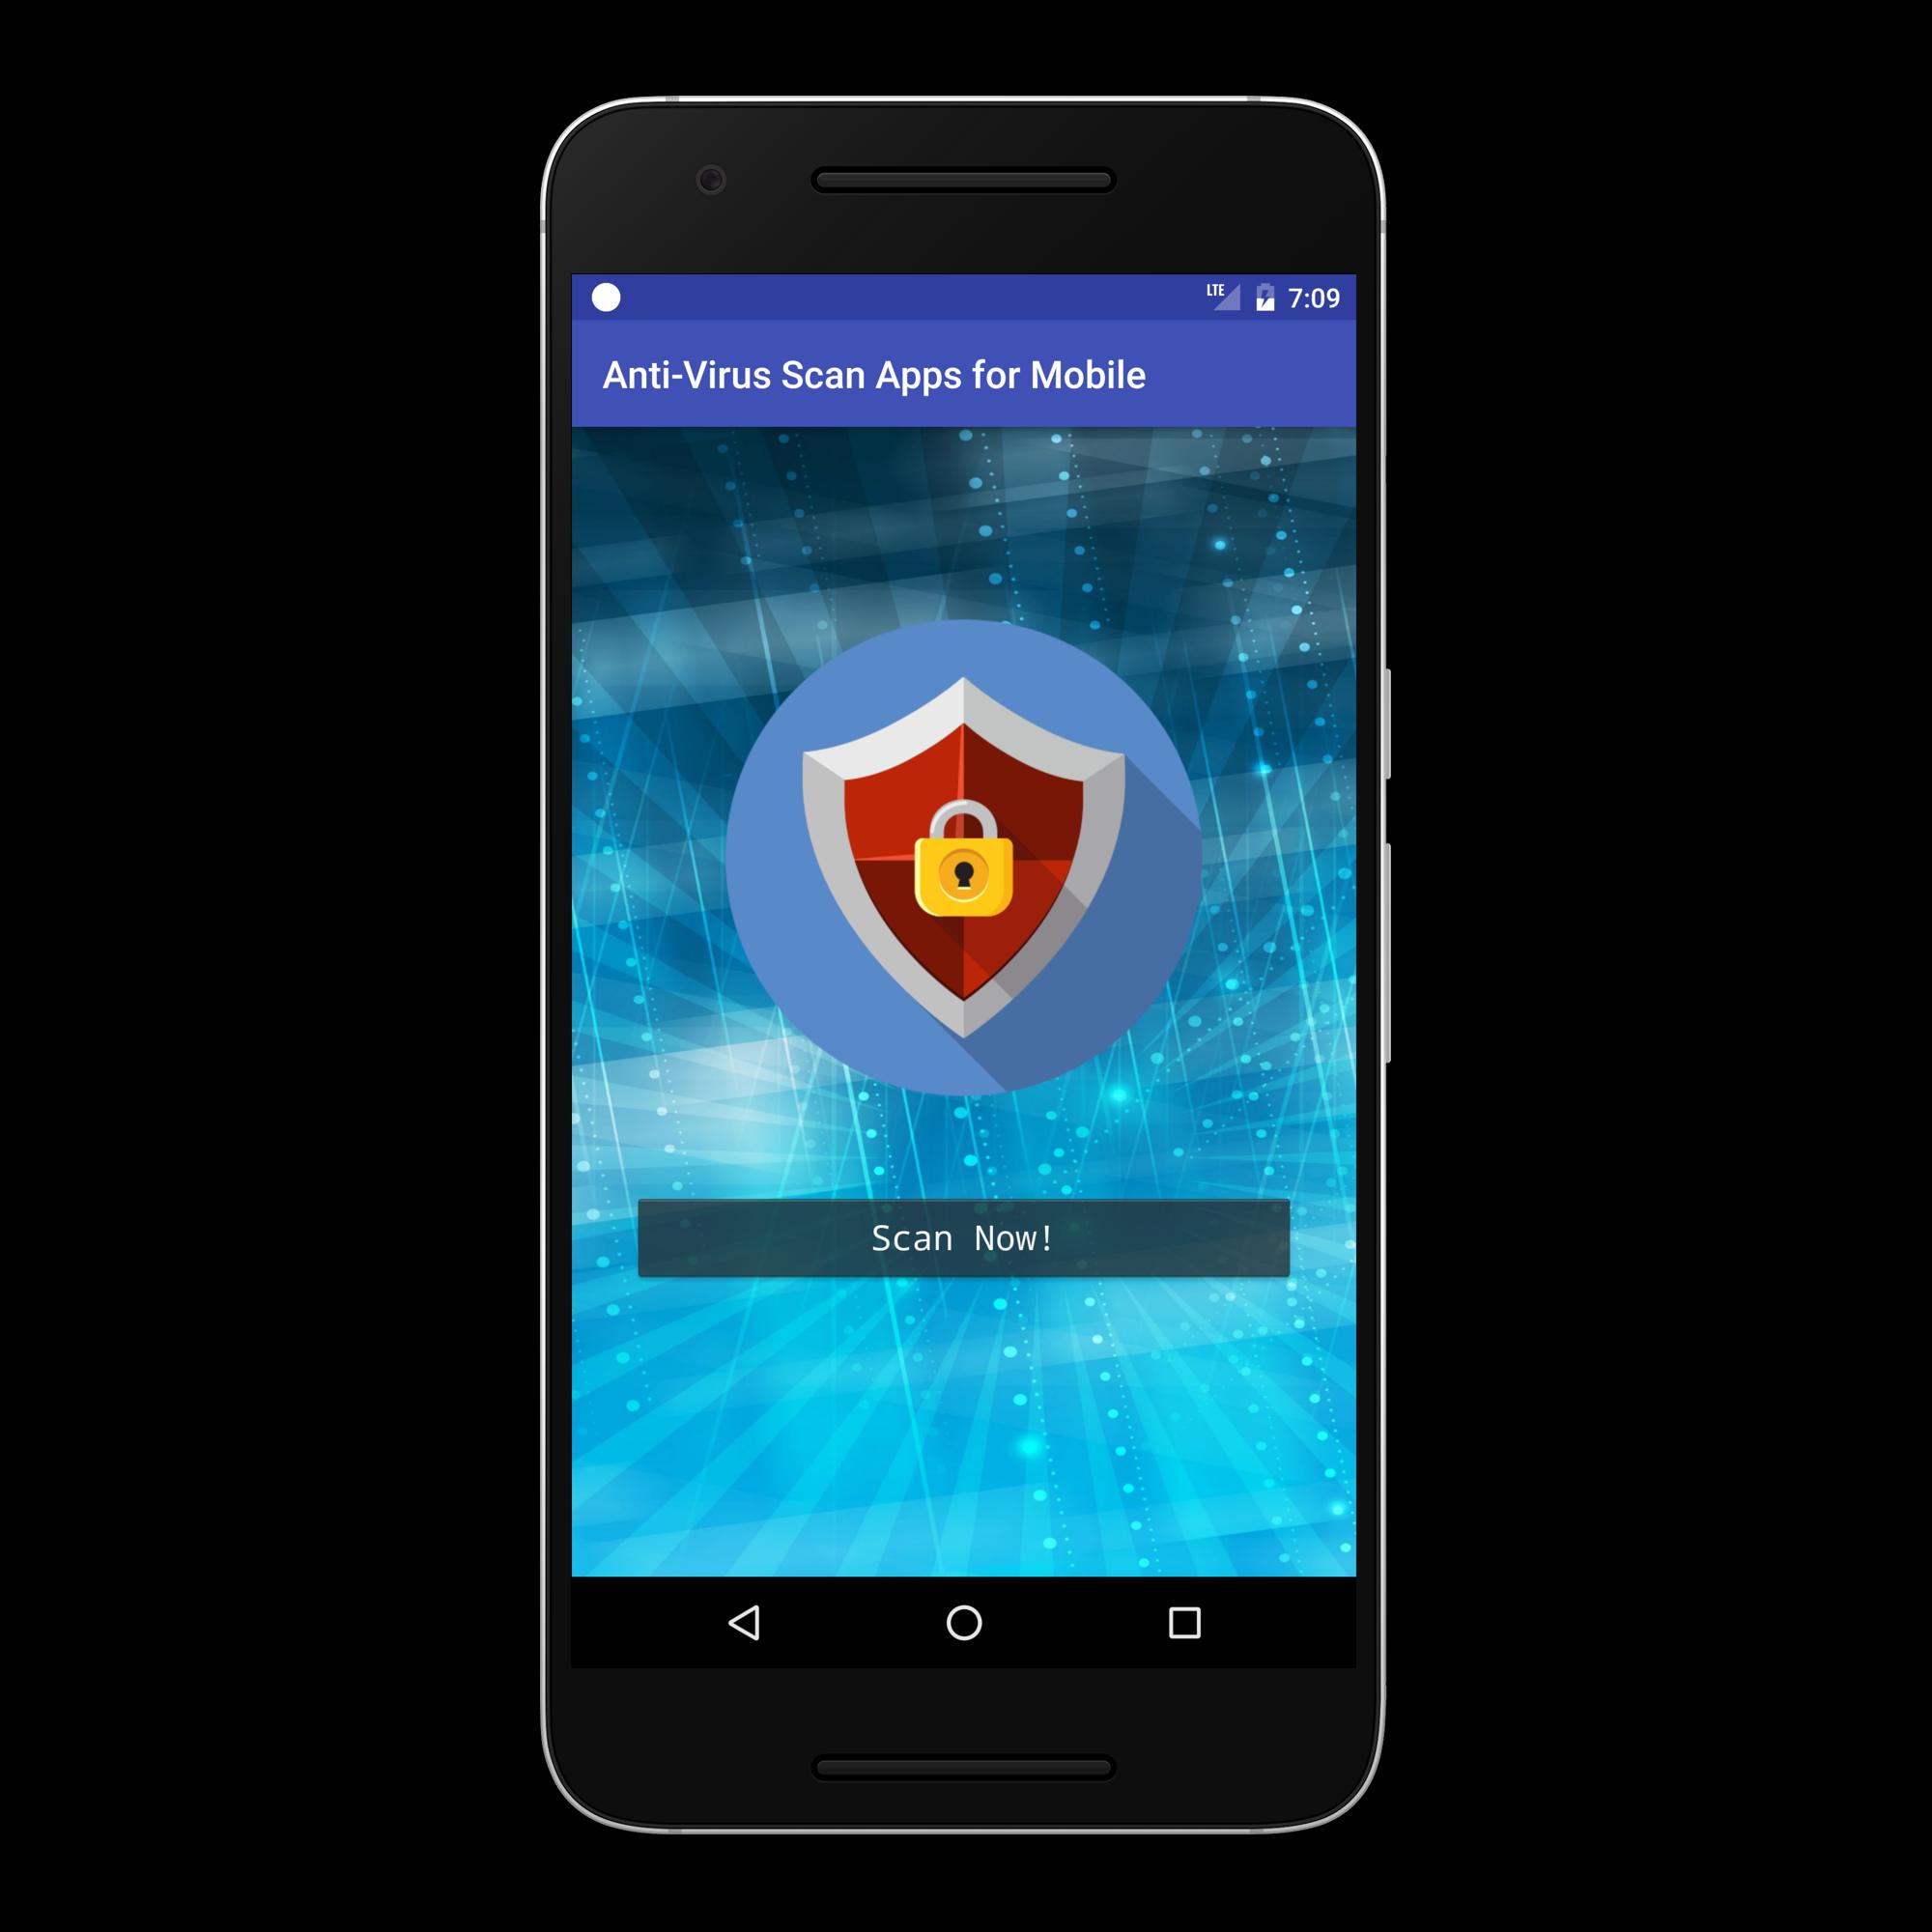 Anti-Virus Scan Apps for Android - APK Download